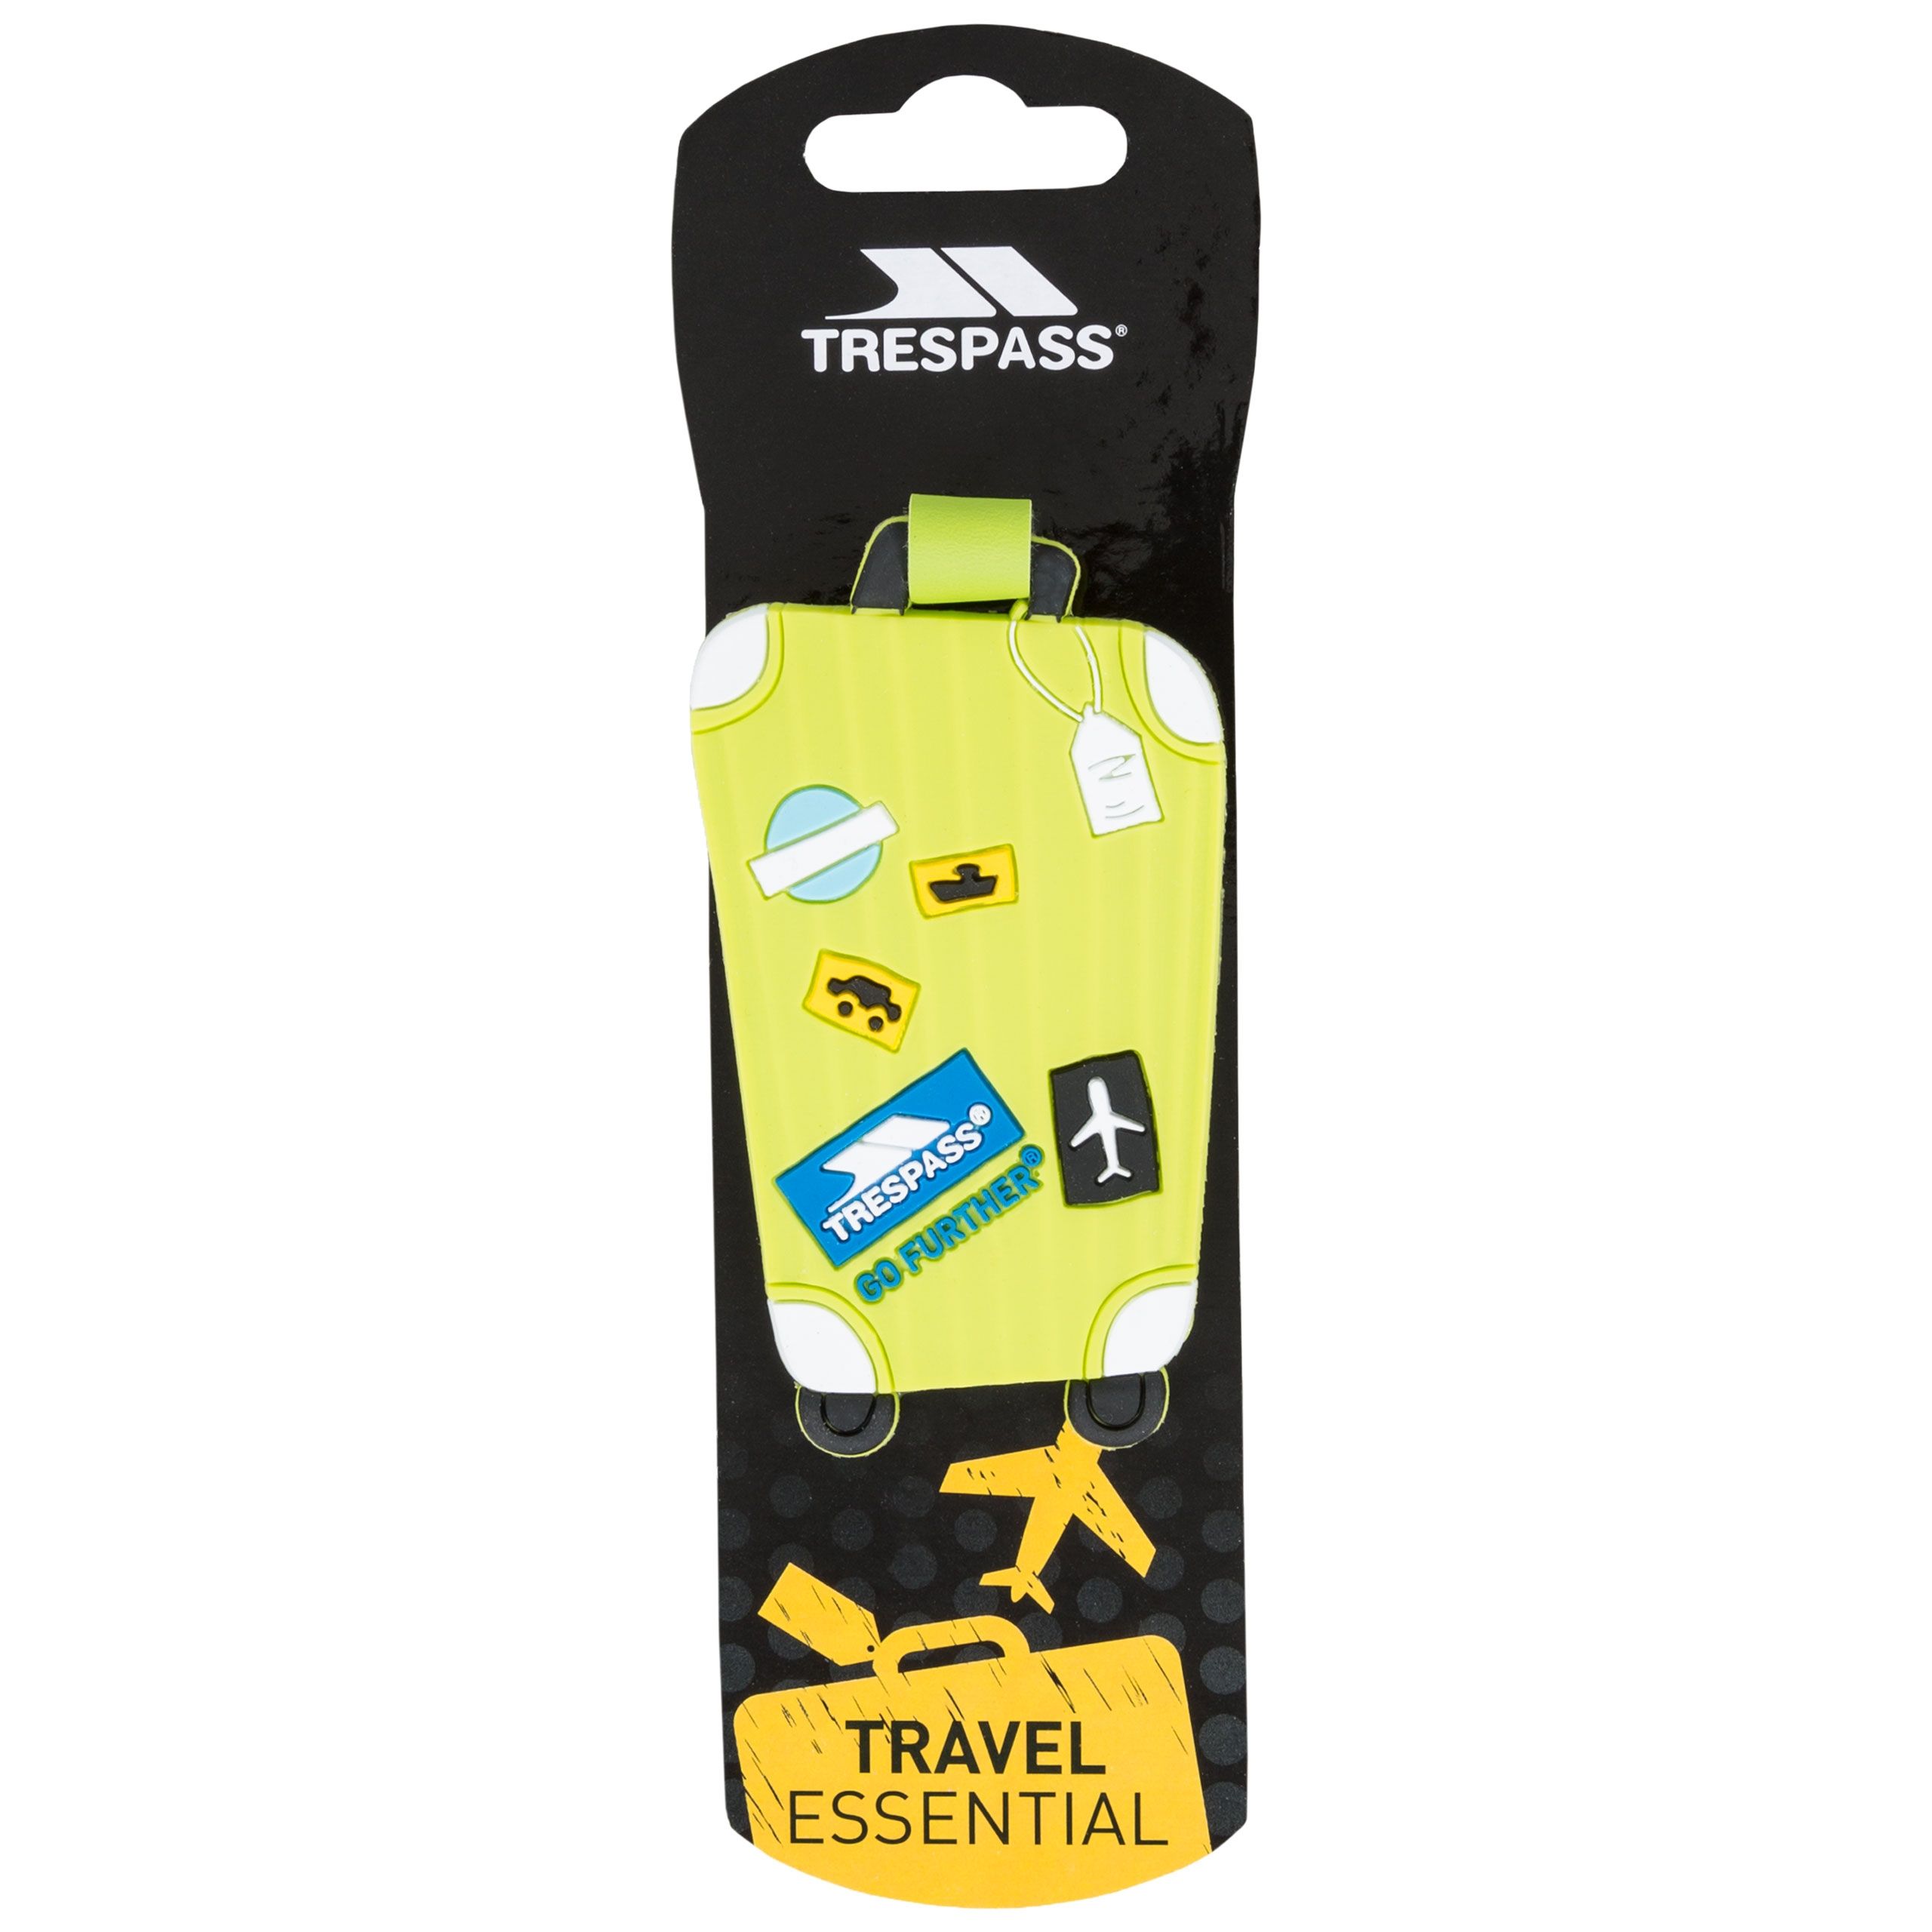 Traveltag Luggage Tags